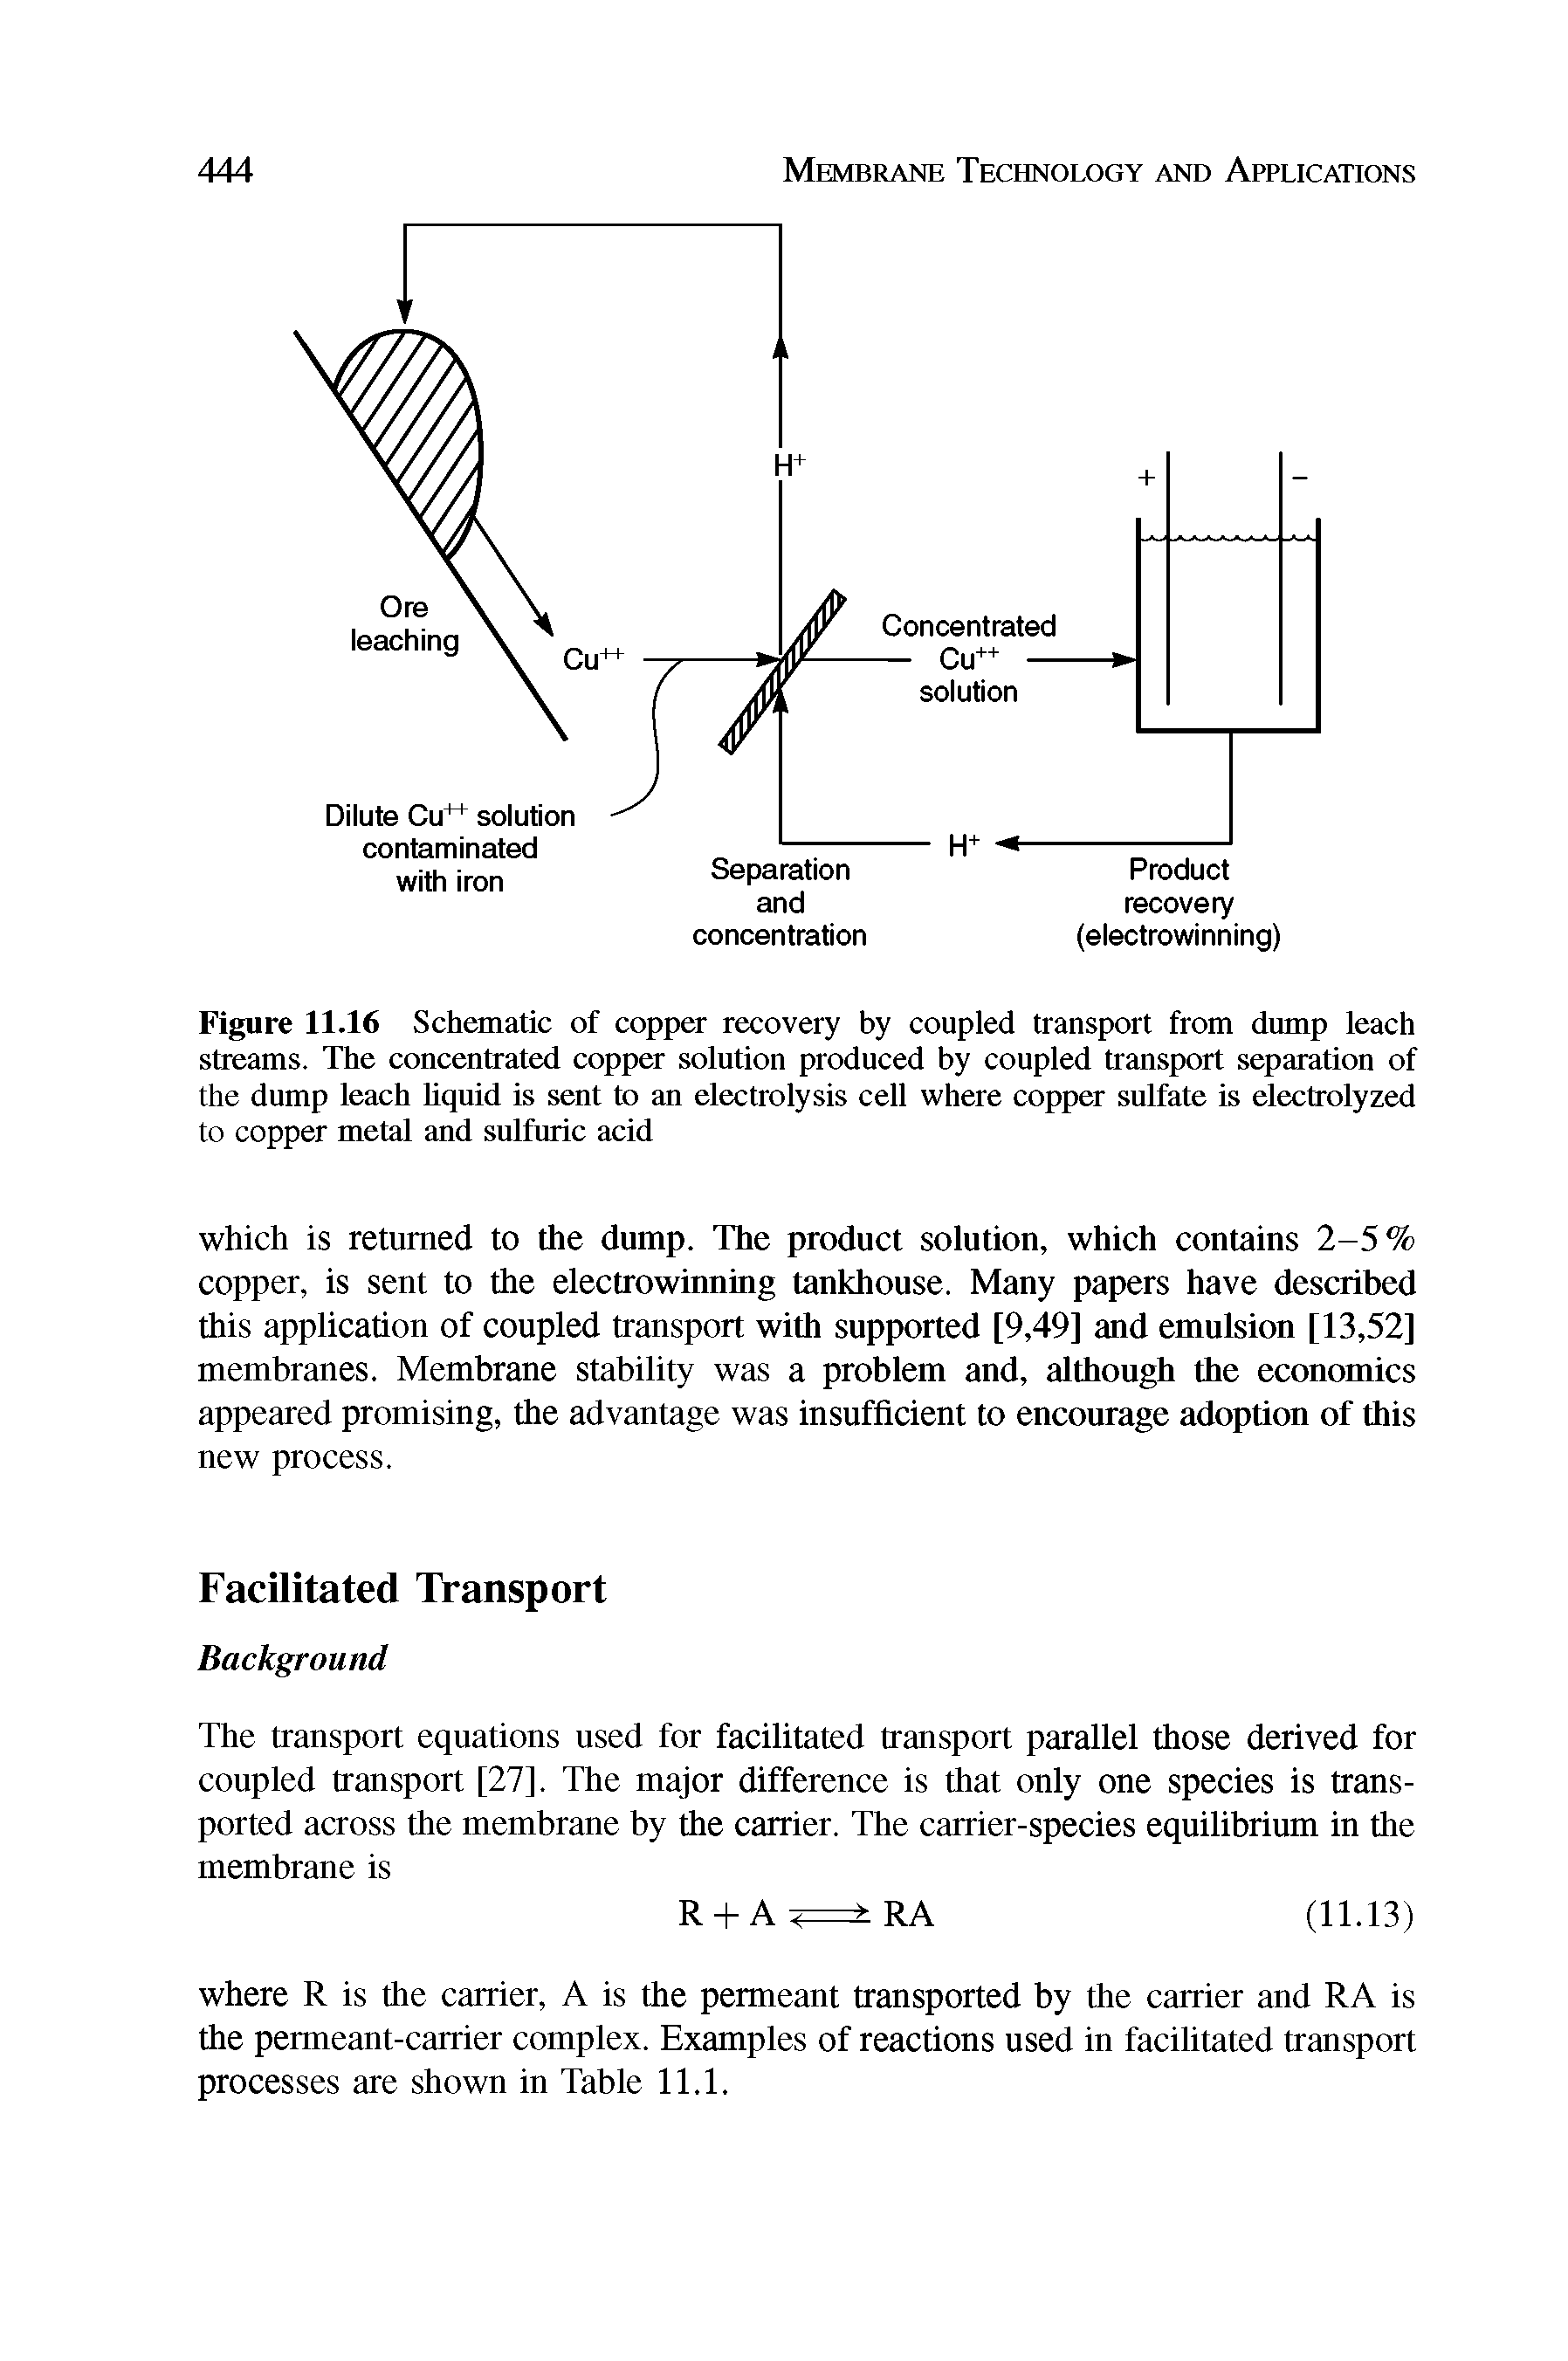 Figure 11.16 Schematic of copper recovery by coupled transport from dump leach streams. The concentrated copper solution produced by coupled transport separation of the dump leach liquid is sent to an electrolysis cell where copper sulfate is electrolyzed to copper metal and sulfuric acid...